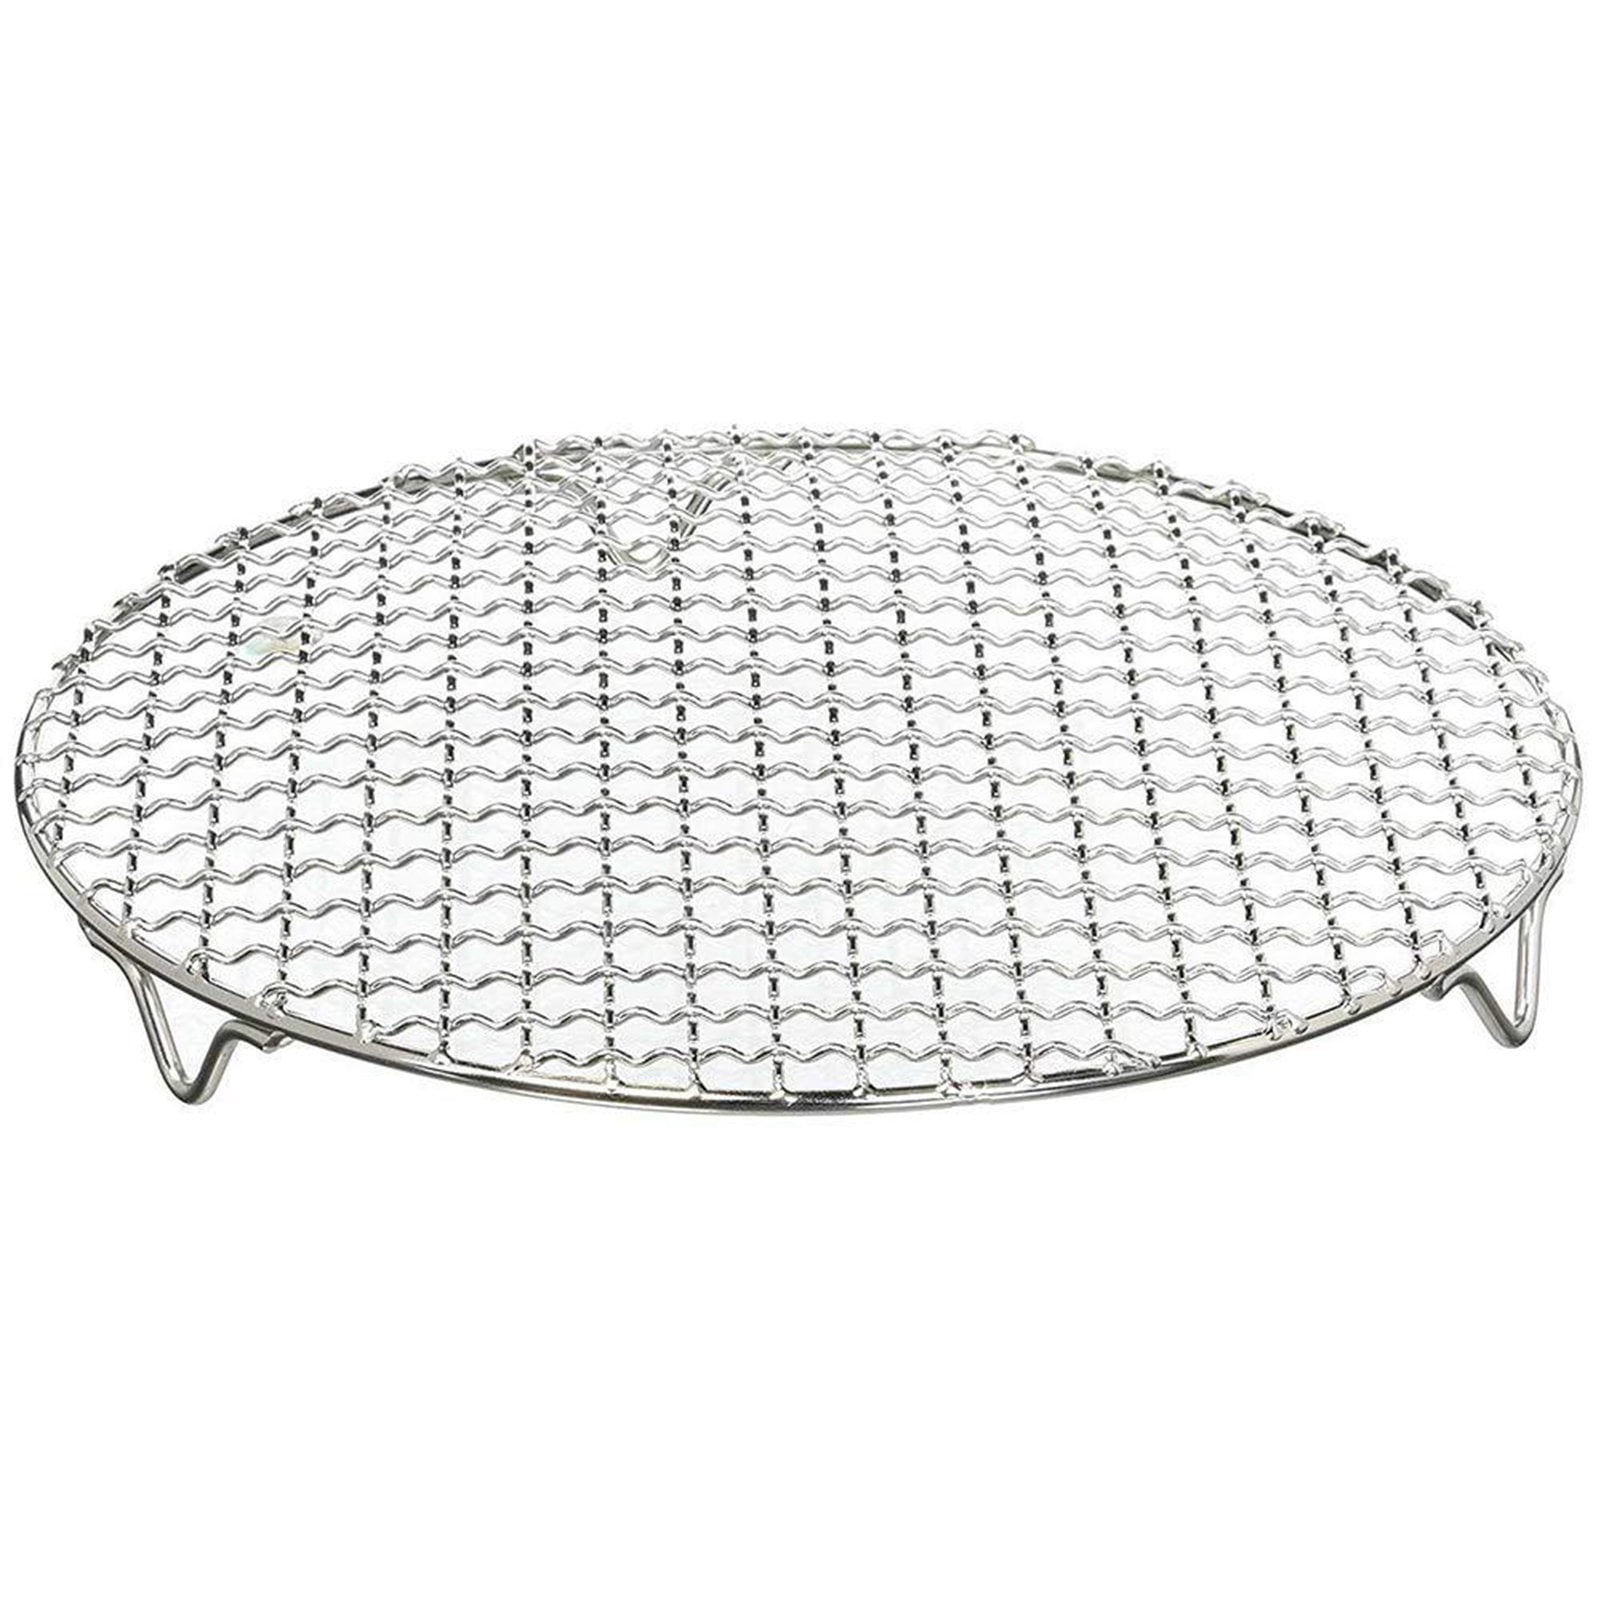 1x Cooking Rack Round Stainless Steel Baking Rack Cooling Rack Steaming W V8M2 